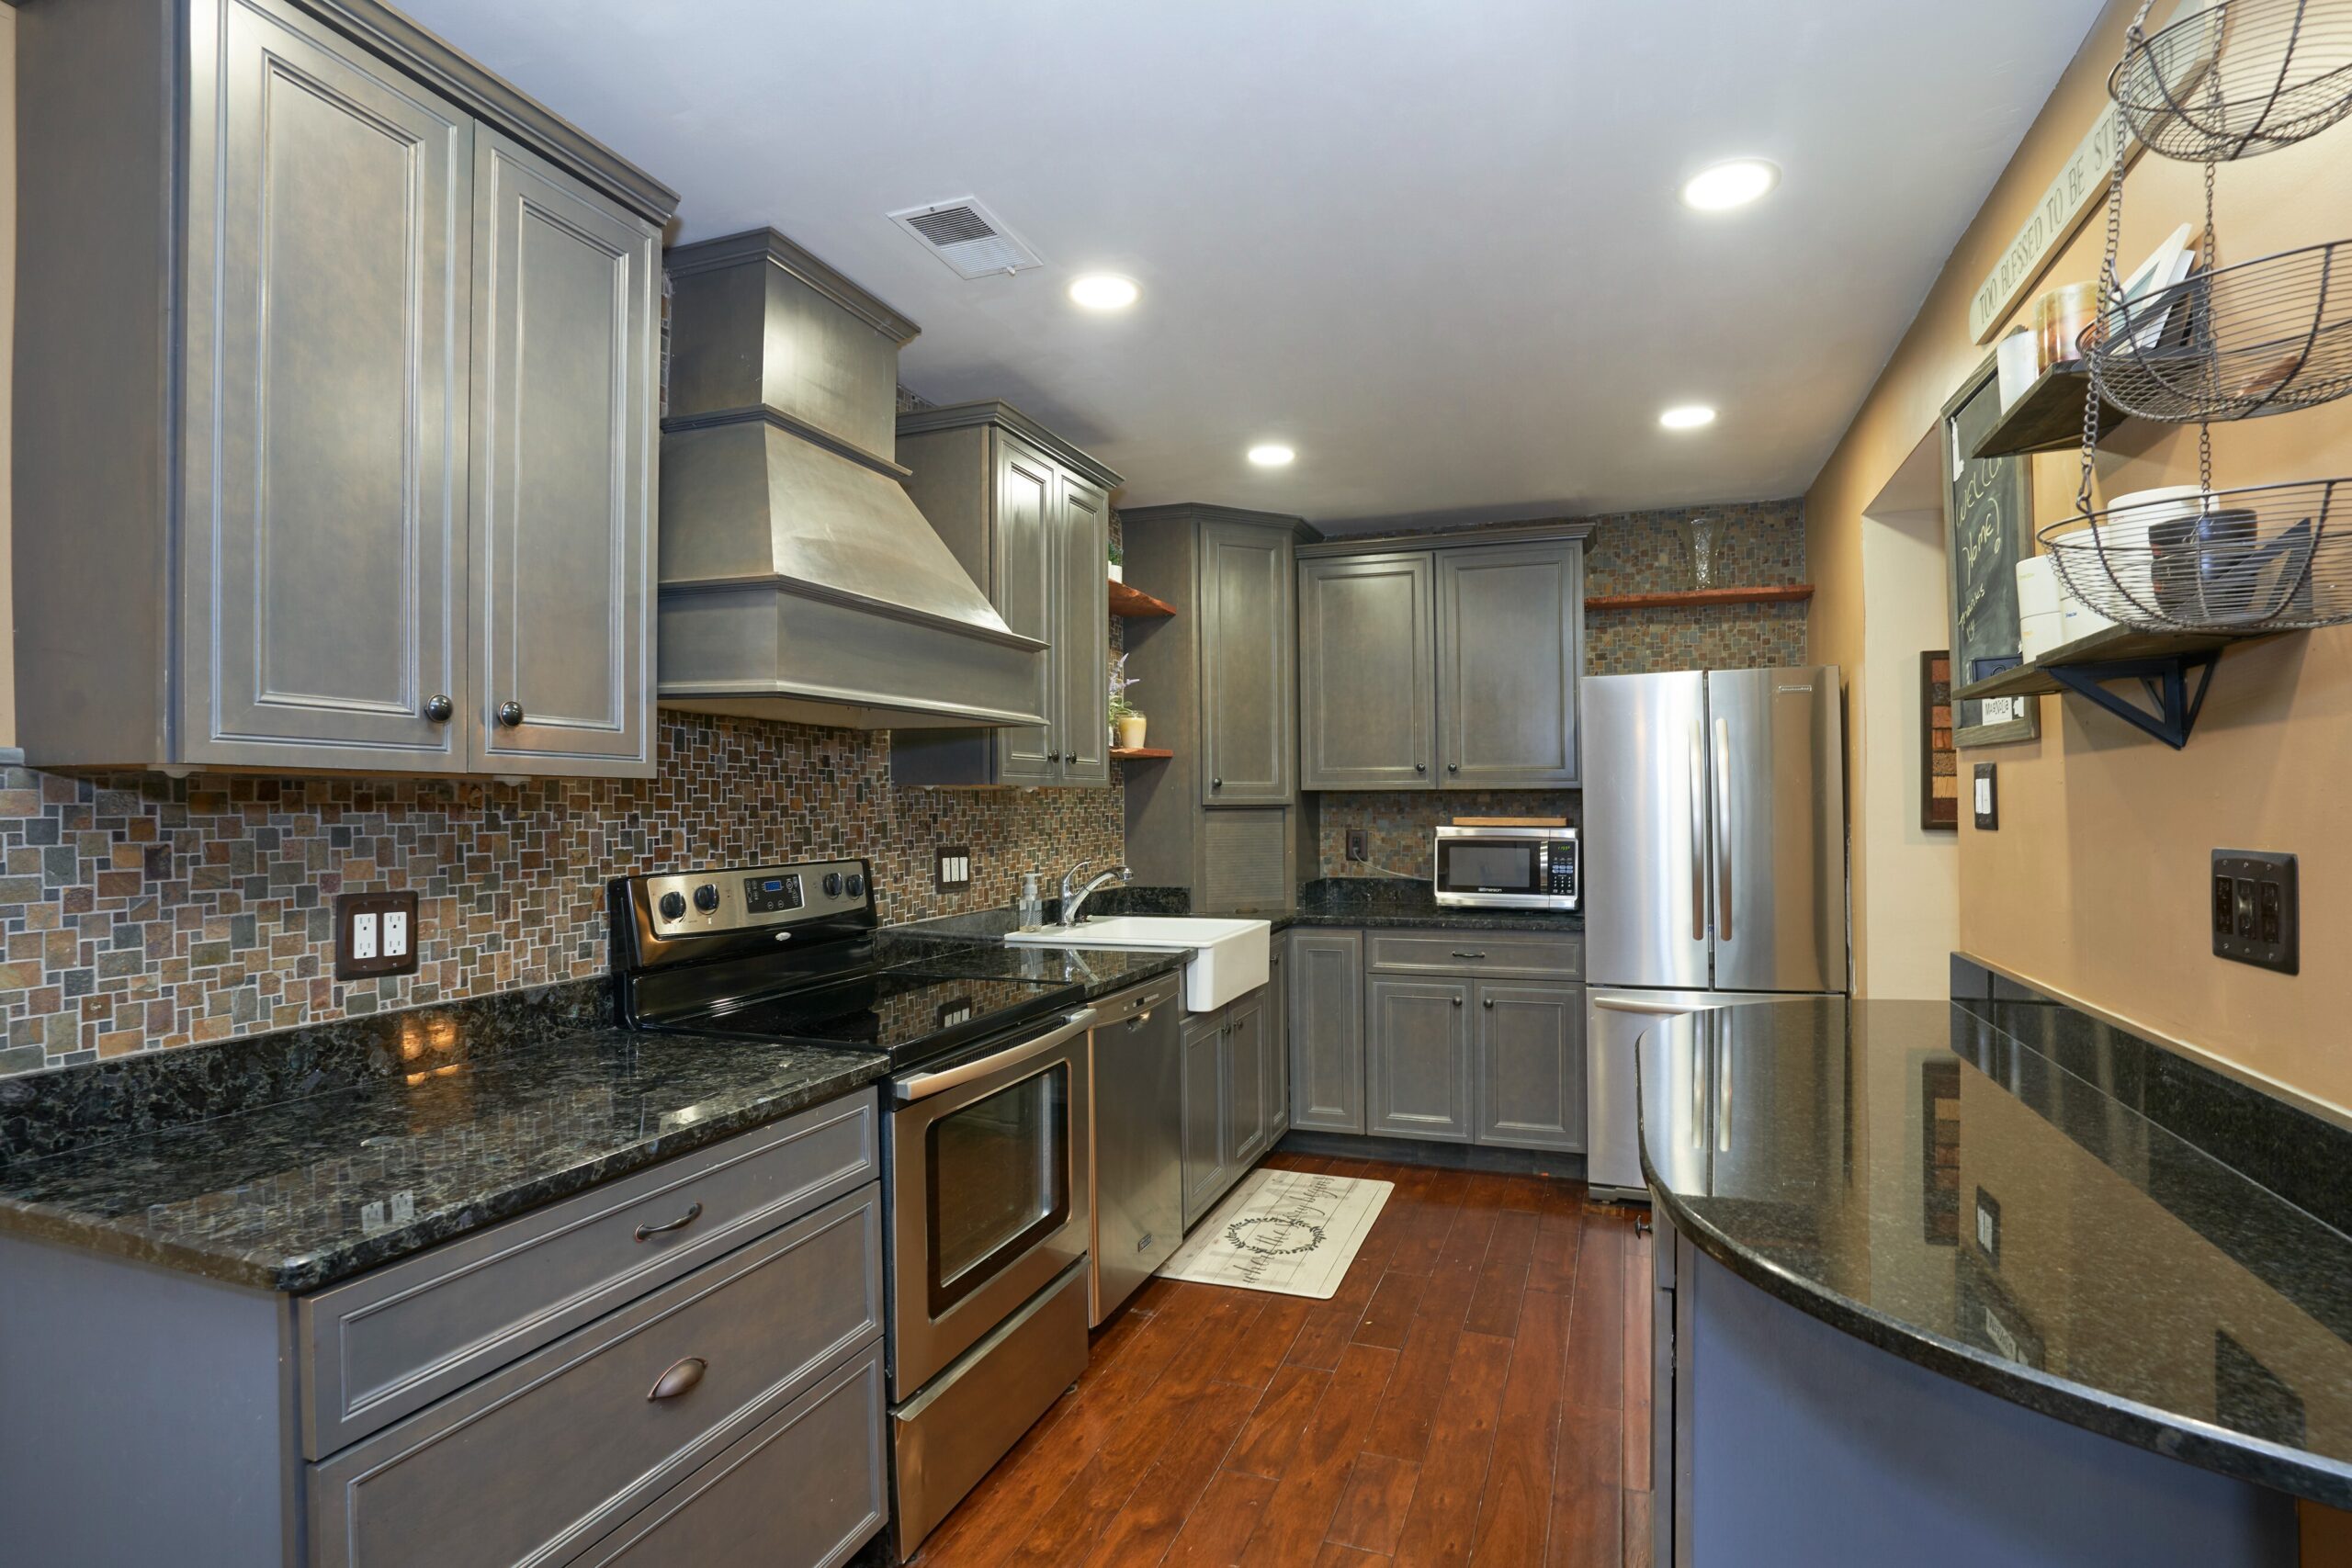 Professional interior photo of 10675 Spring Oak Ct - showing the kitchen with updated grey cabinets, dark granite countertops and stainless appliances with custom range hood